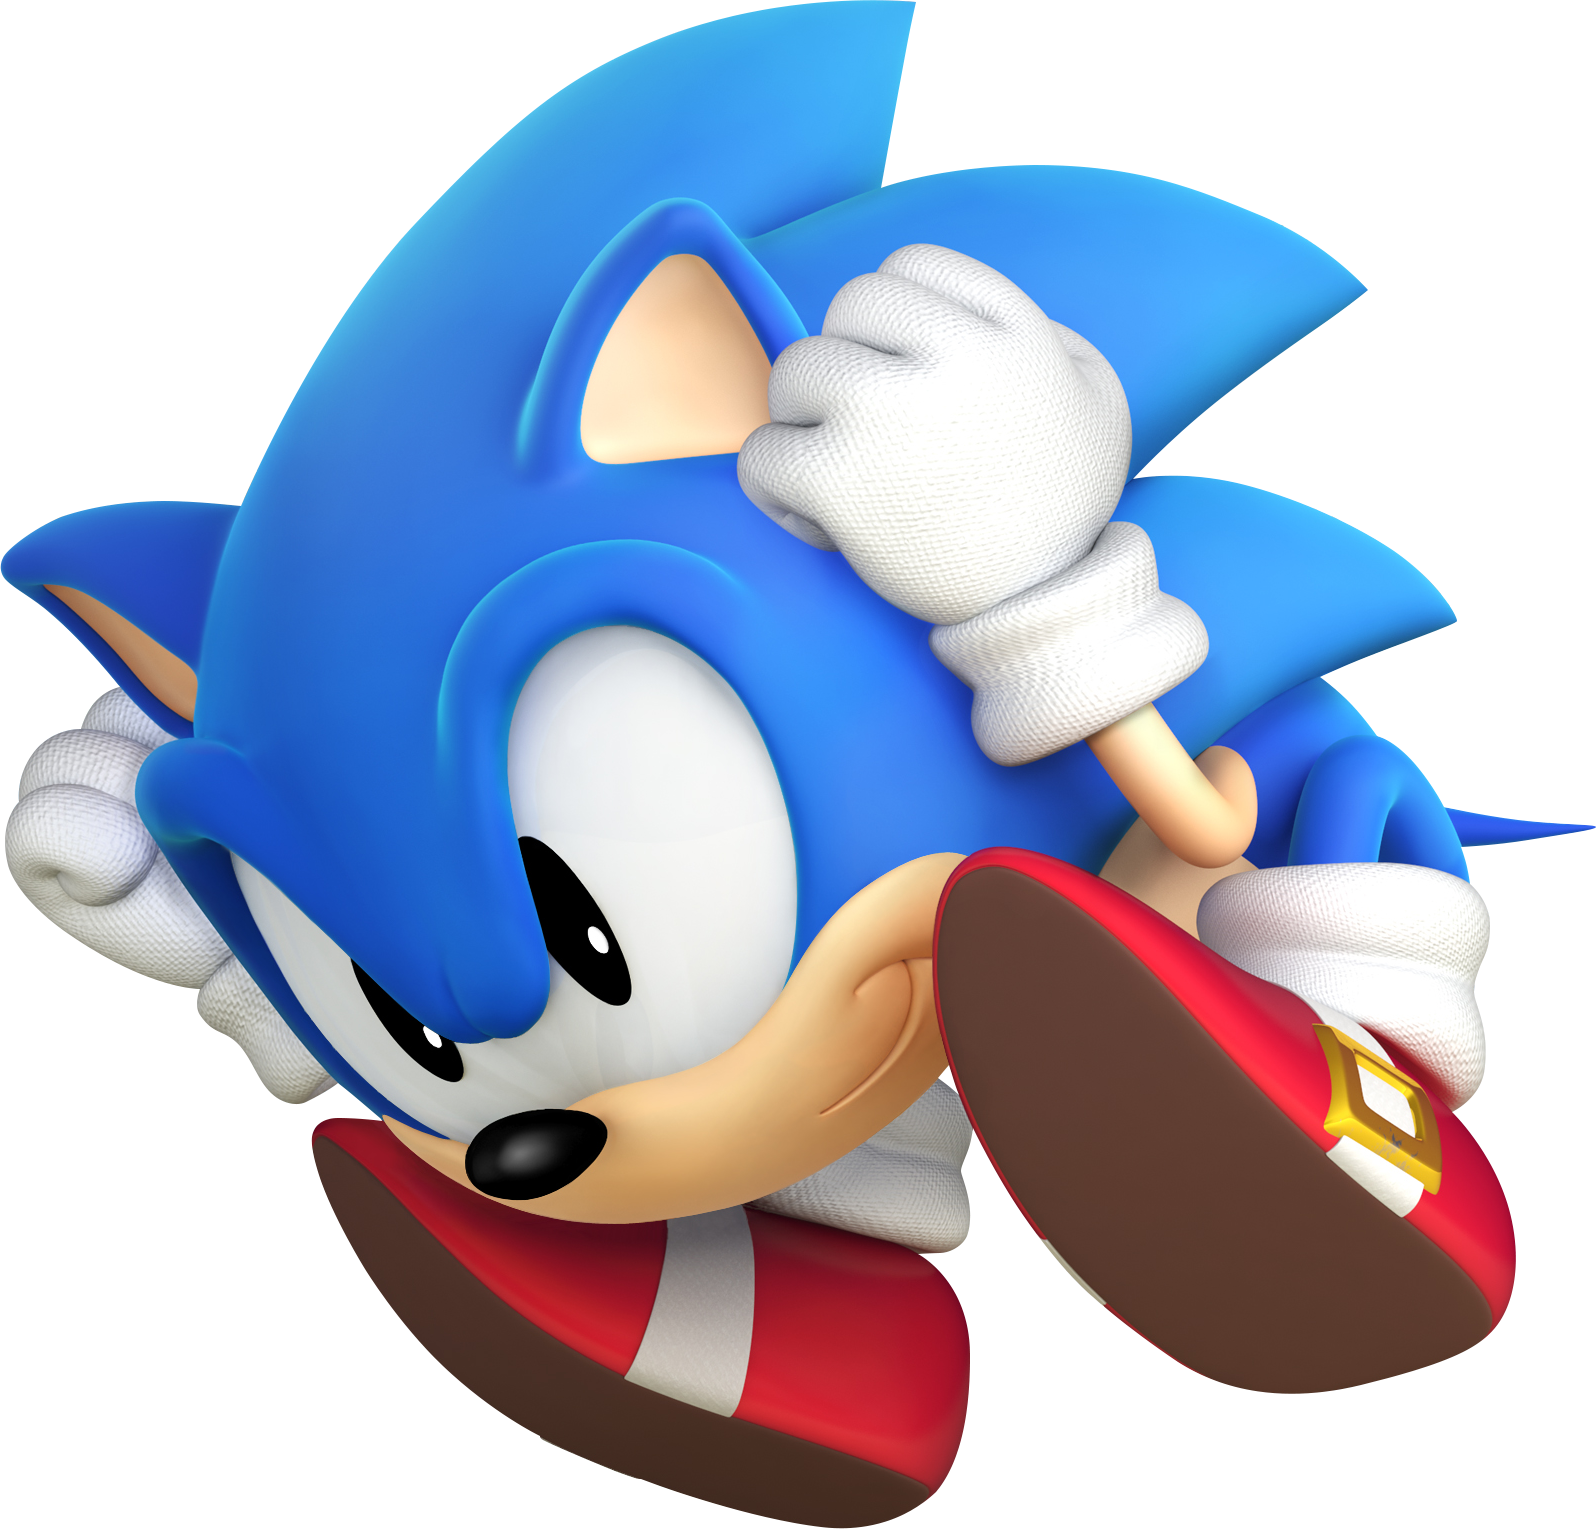 Sonic The Hedgeblog — A spin around of the Super Sonic model used in the